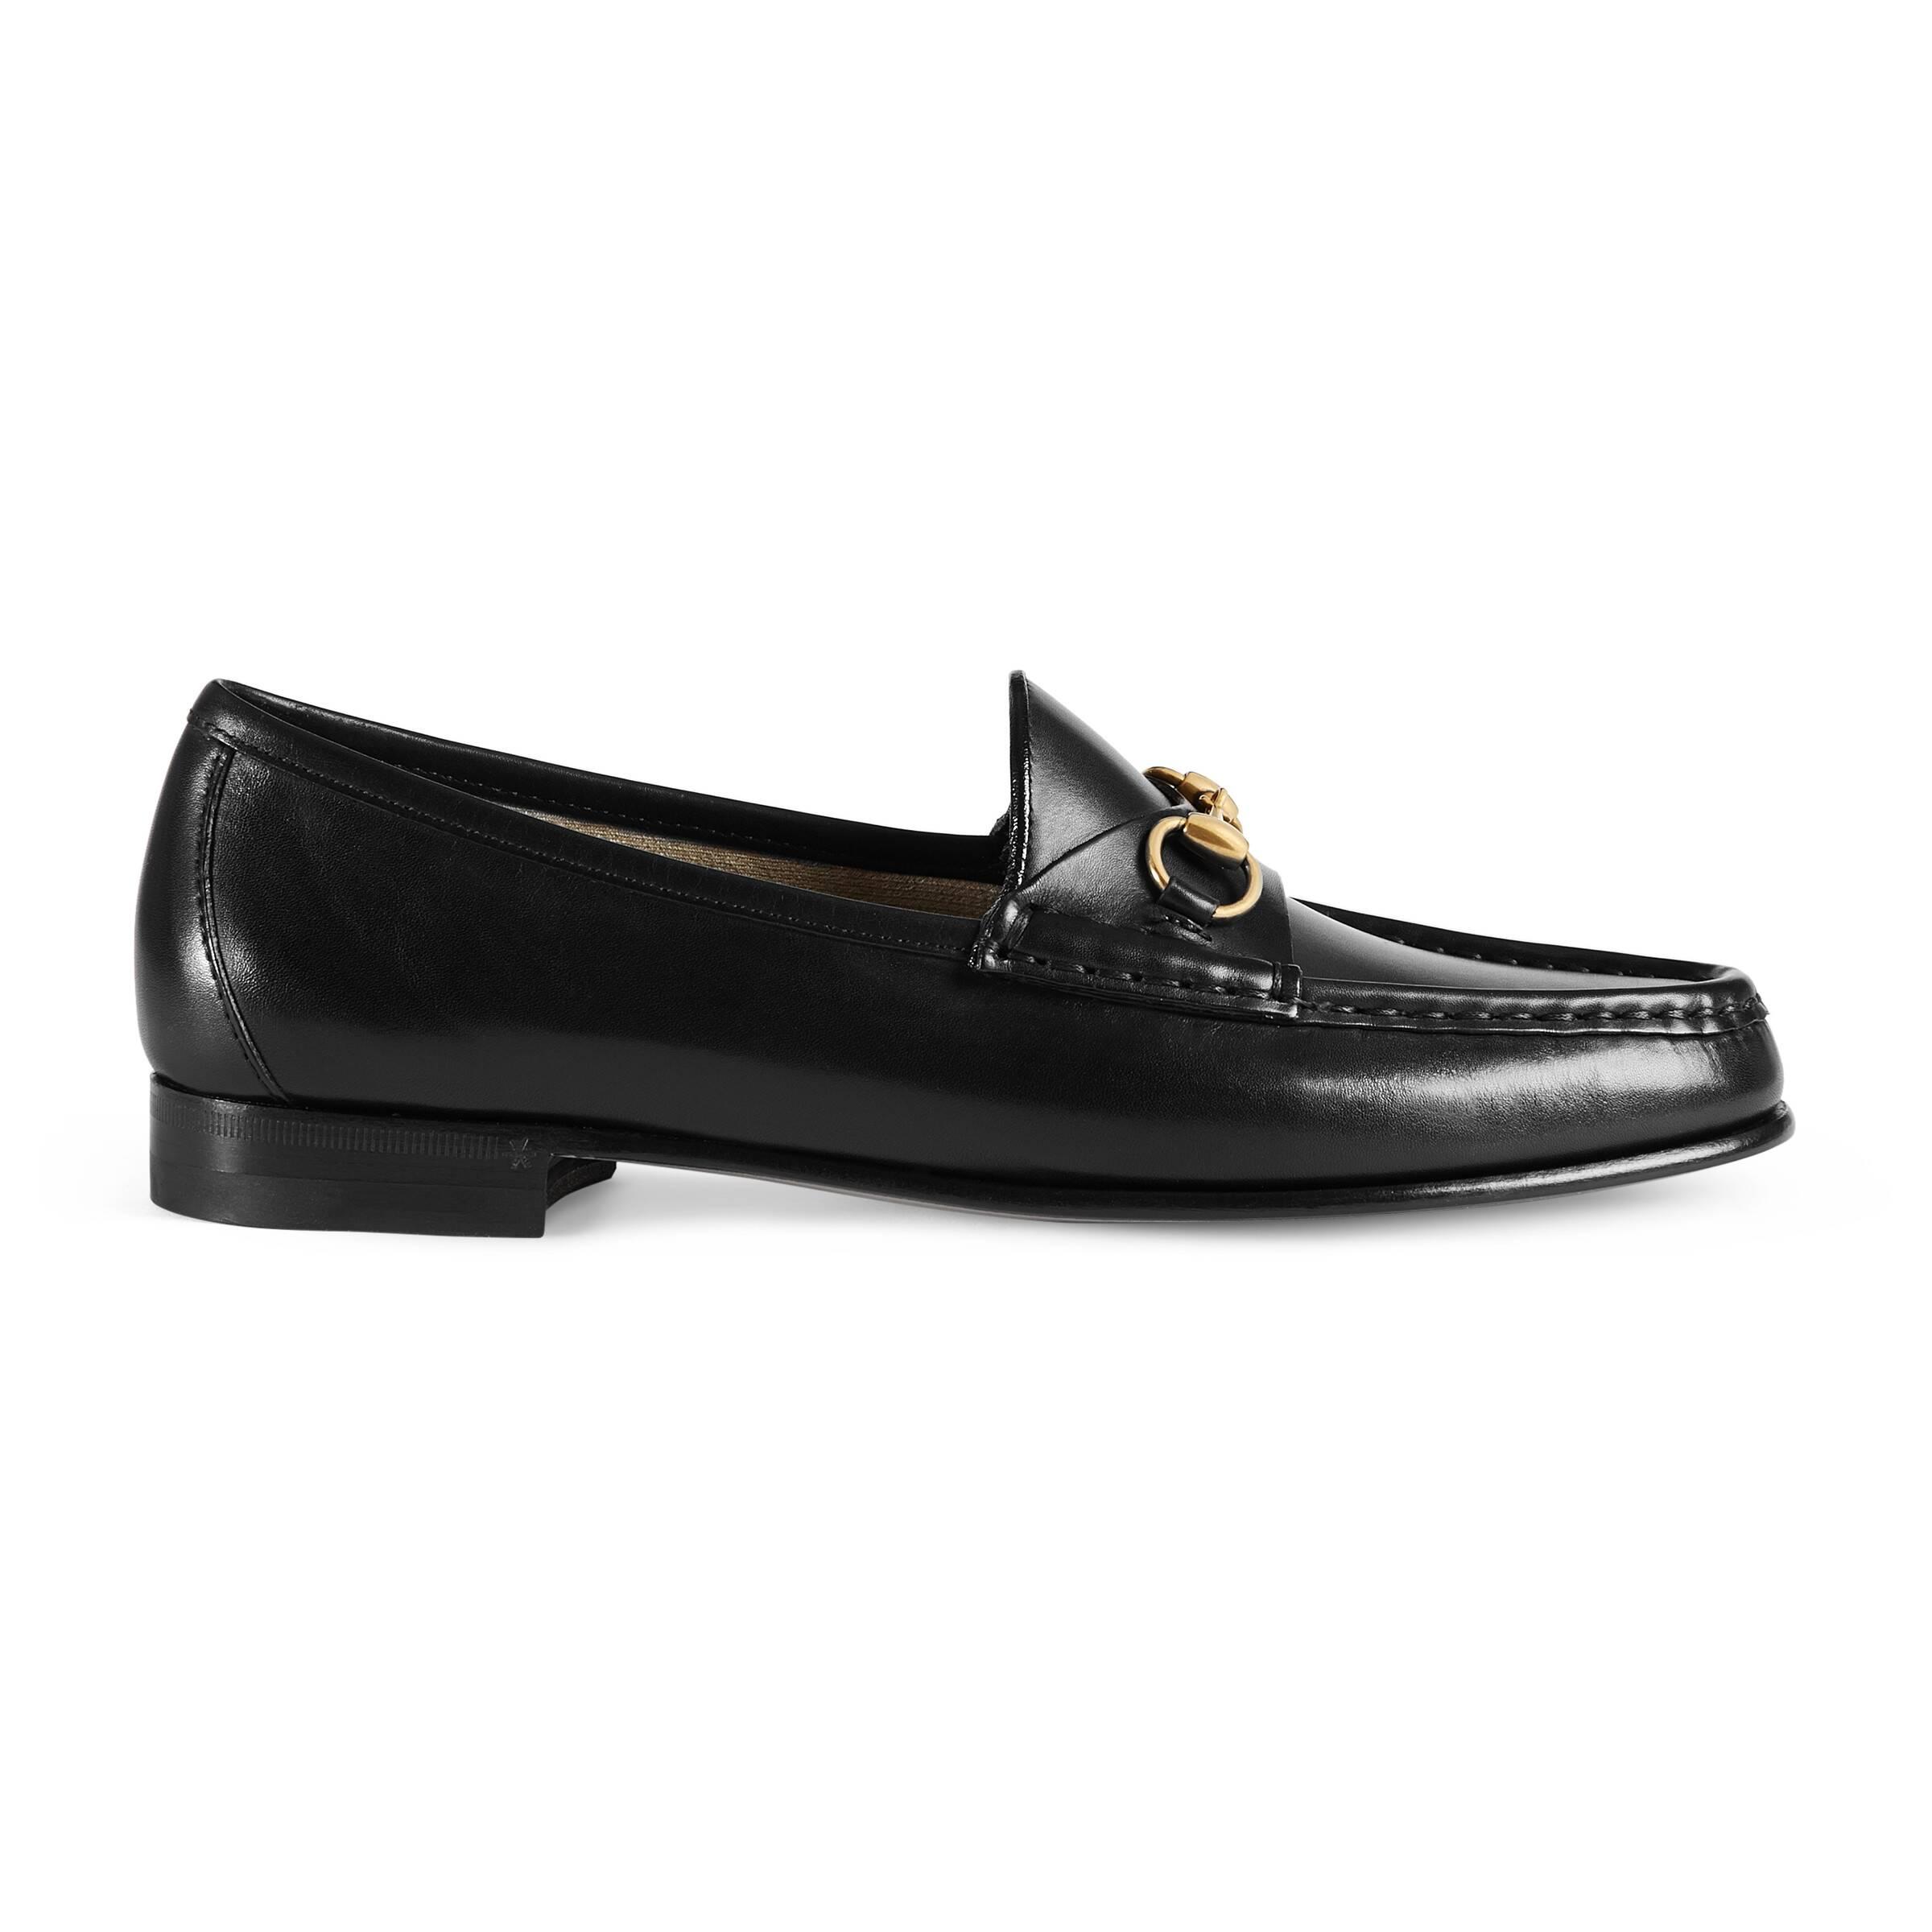 Gucci 1953 Horsebit Loafer In Leather in Black - Lyst